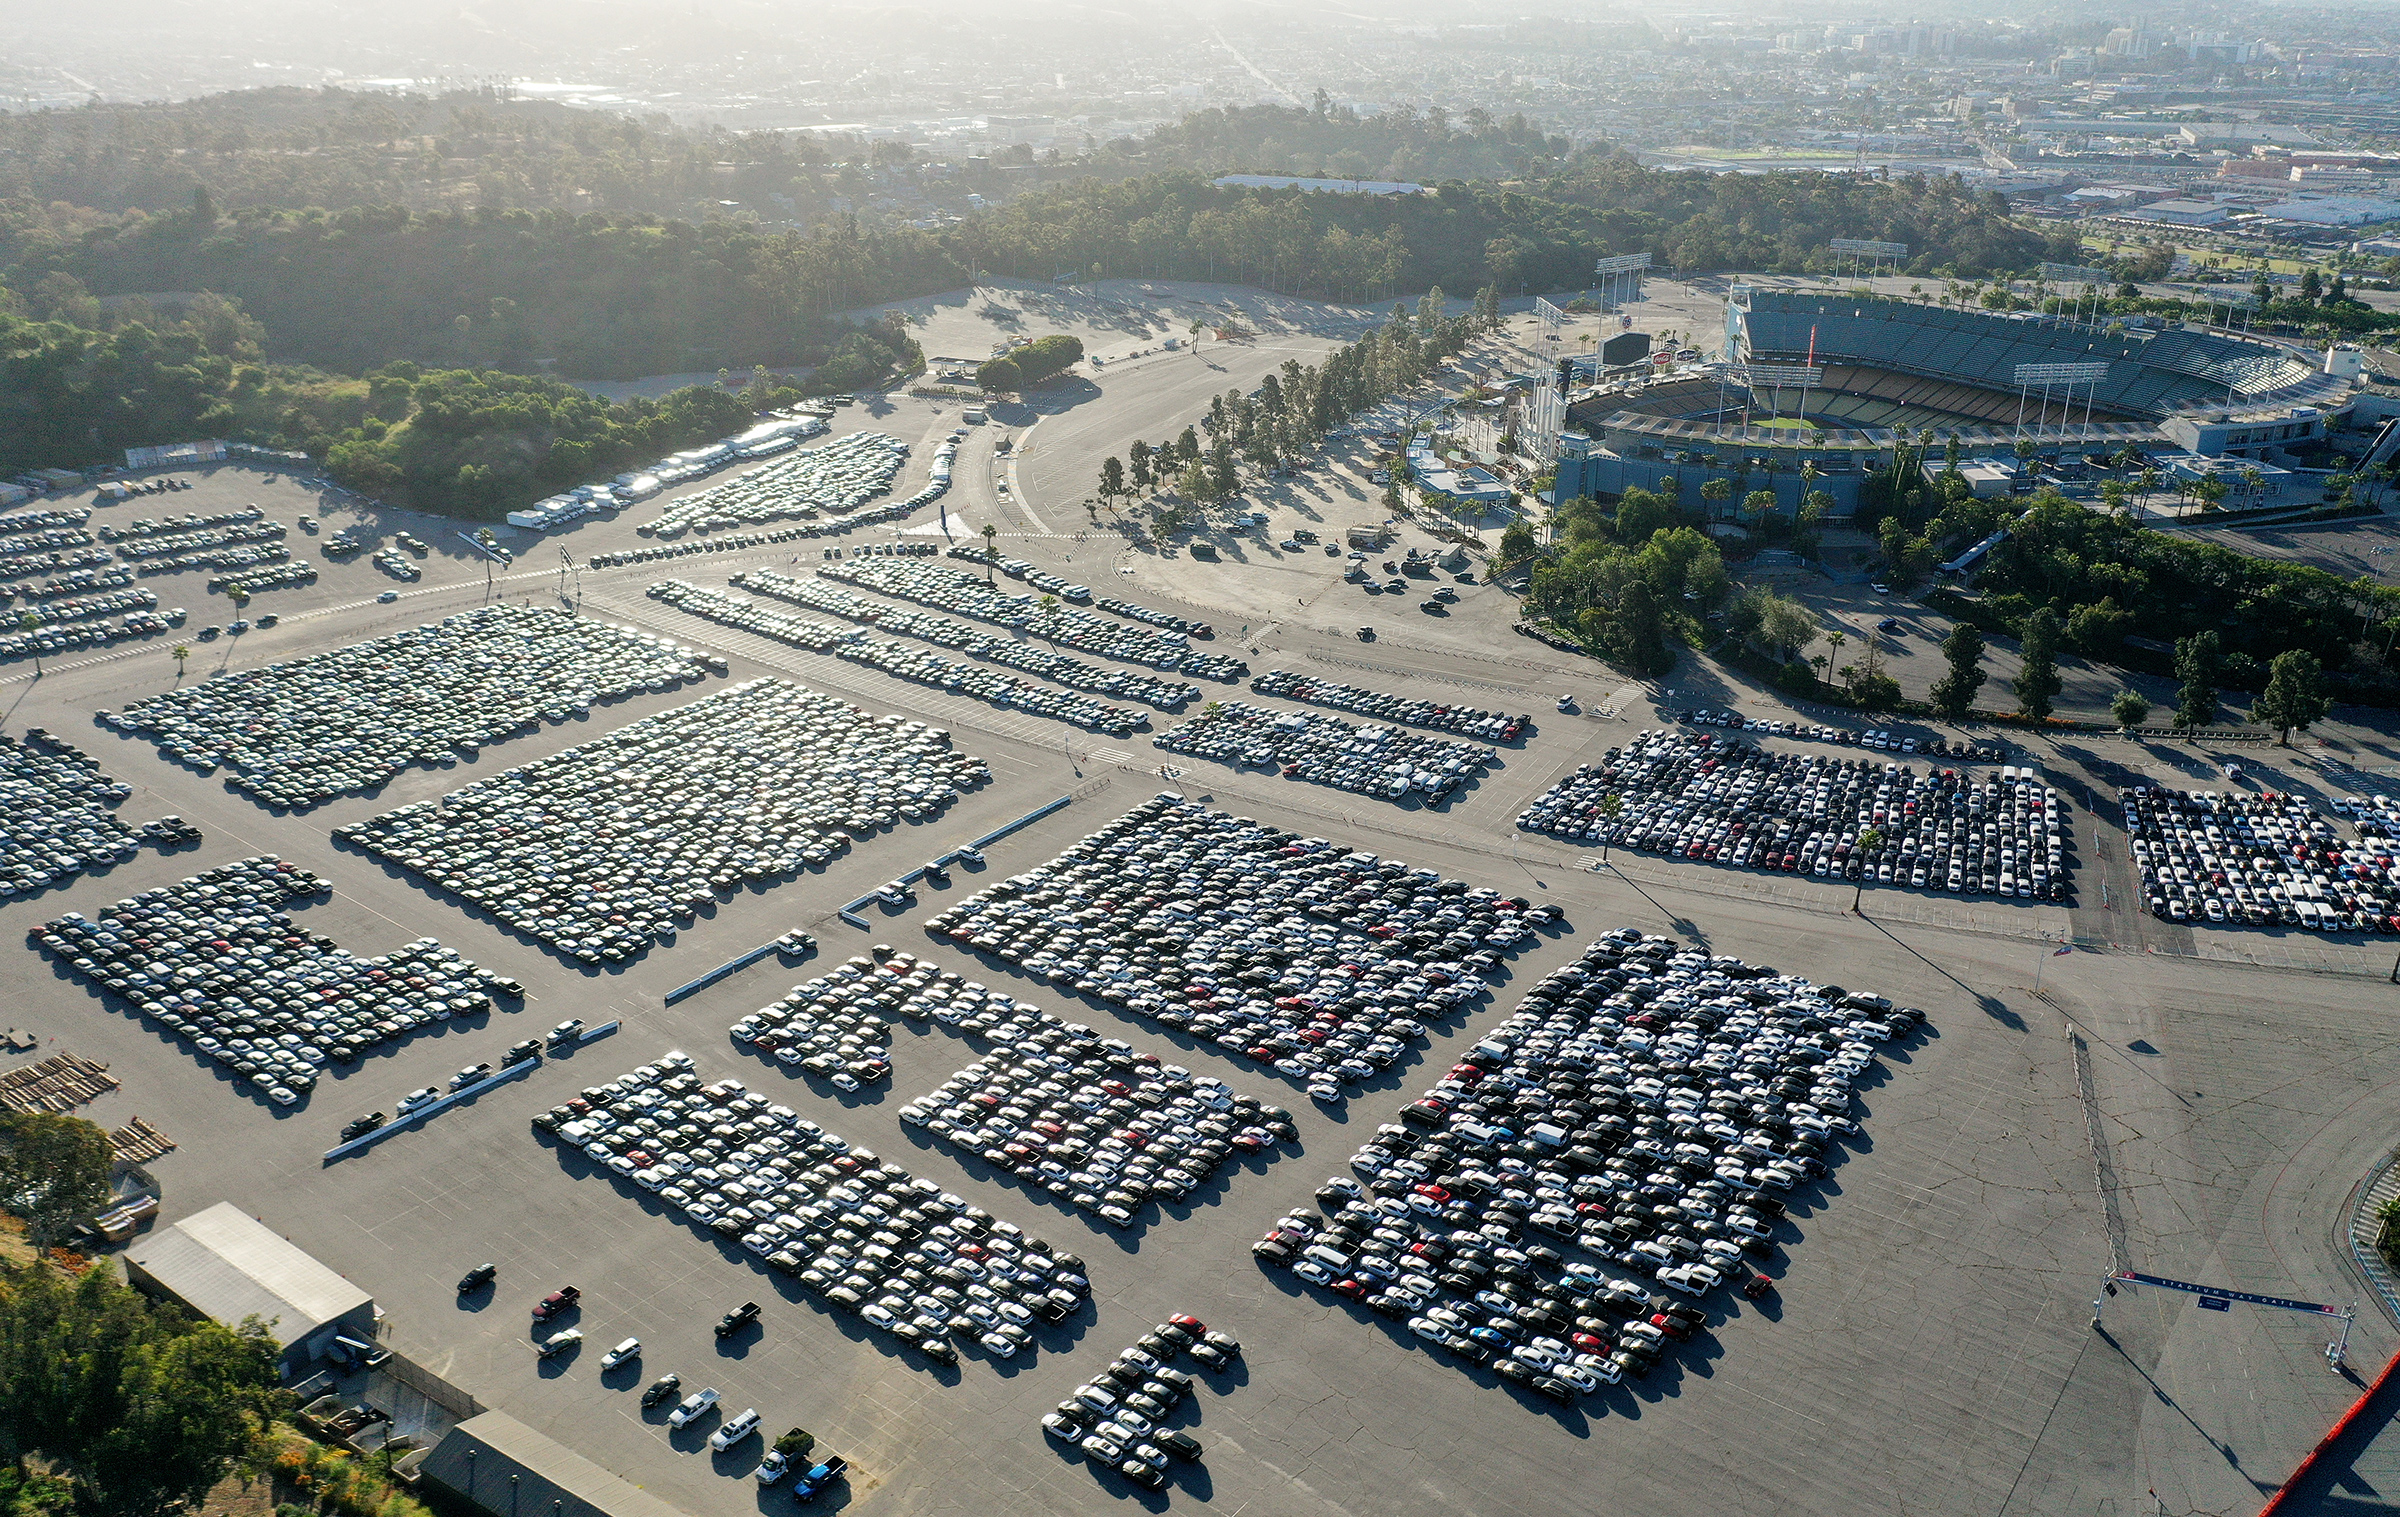 An aerial view of rental cars parked at Dodger Stadium in Los Angeles on May 20, 2020.